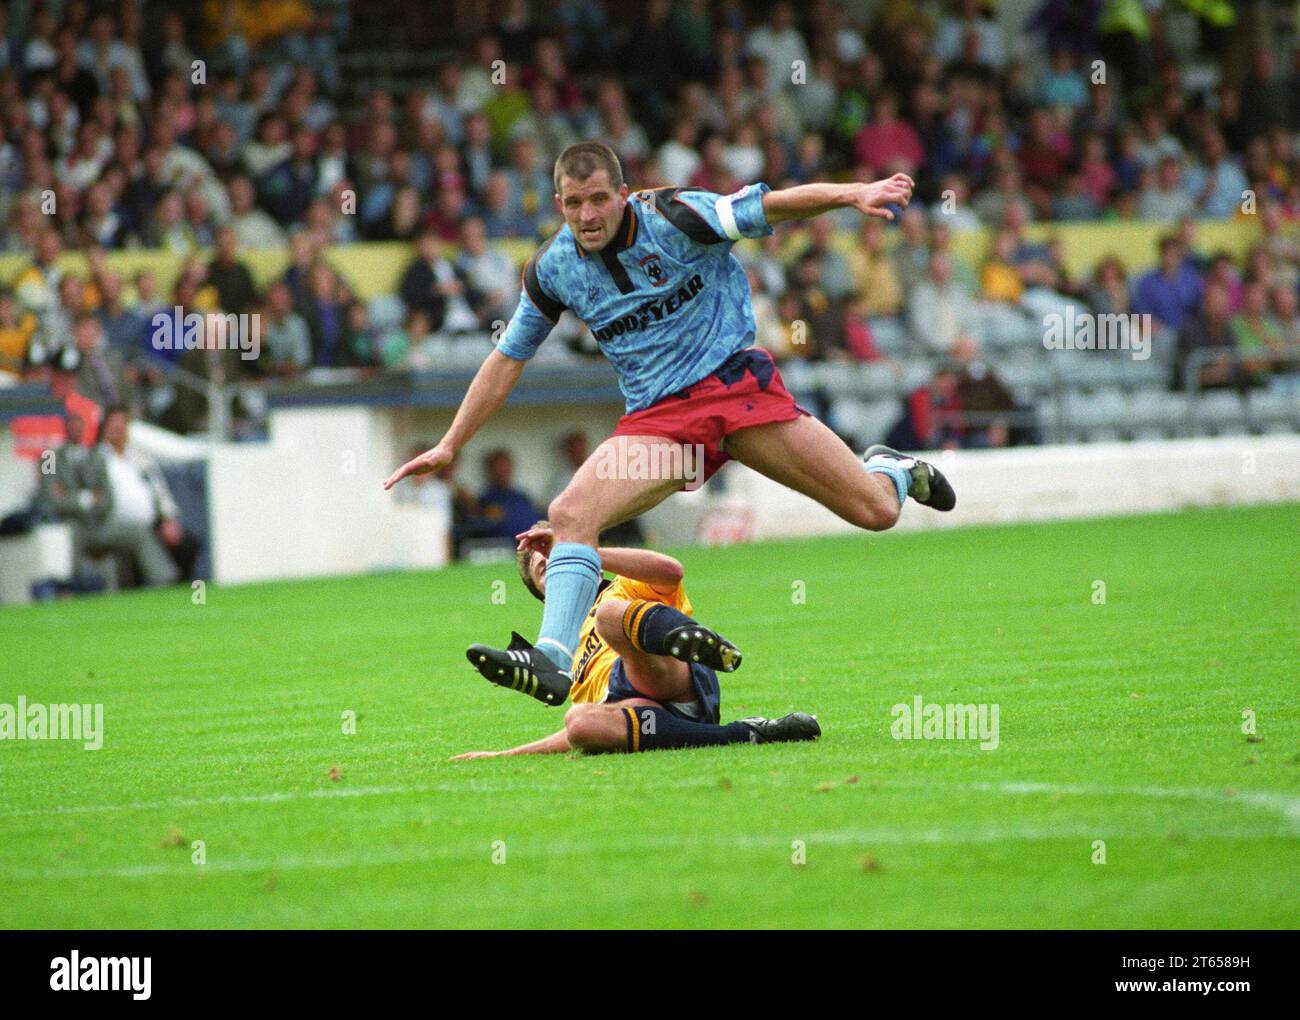 OXFORD V WOLVES AT THE MANOR GROUND 29/8/92 Steve Bull shoots Stock Photo